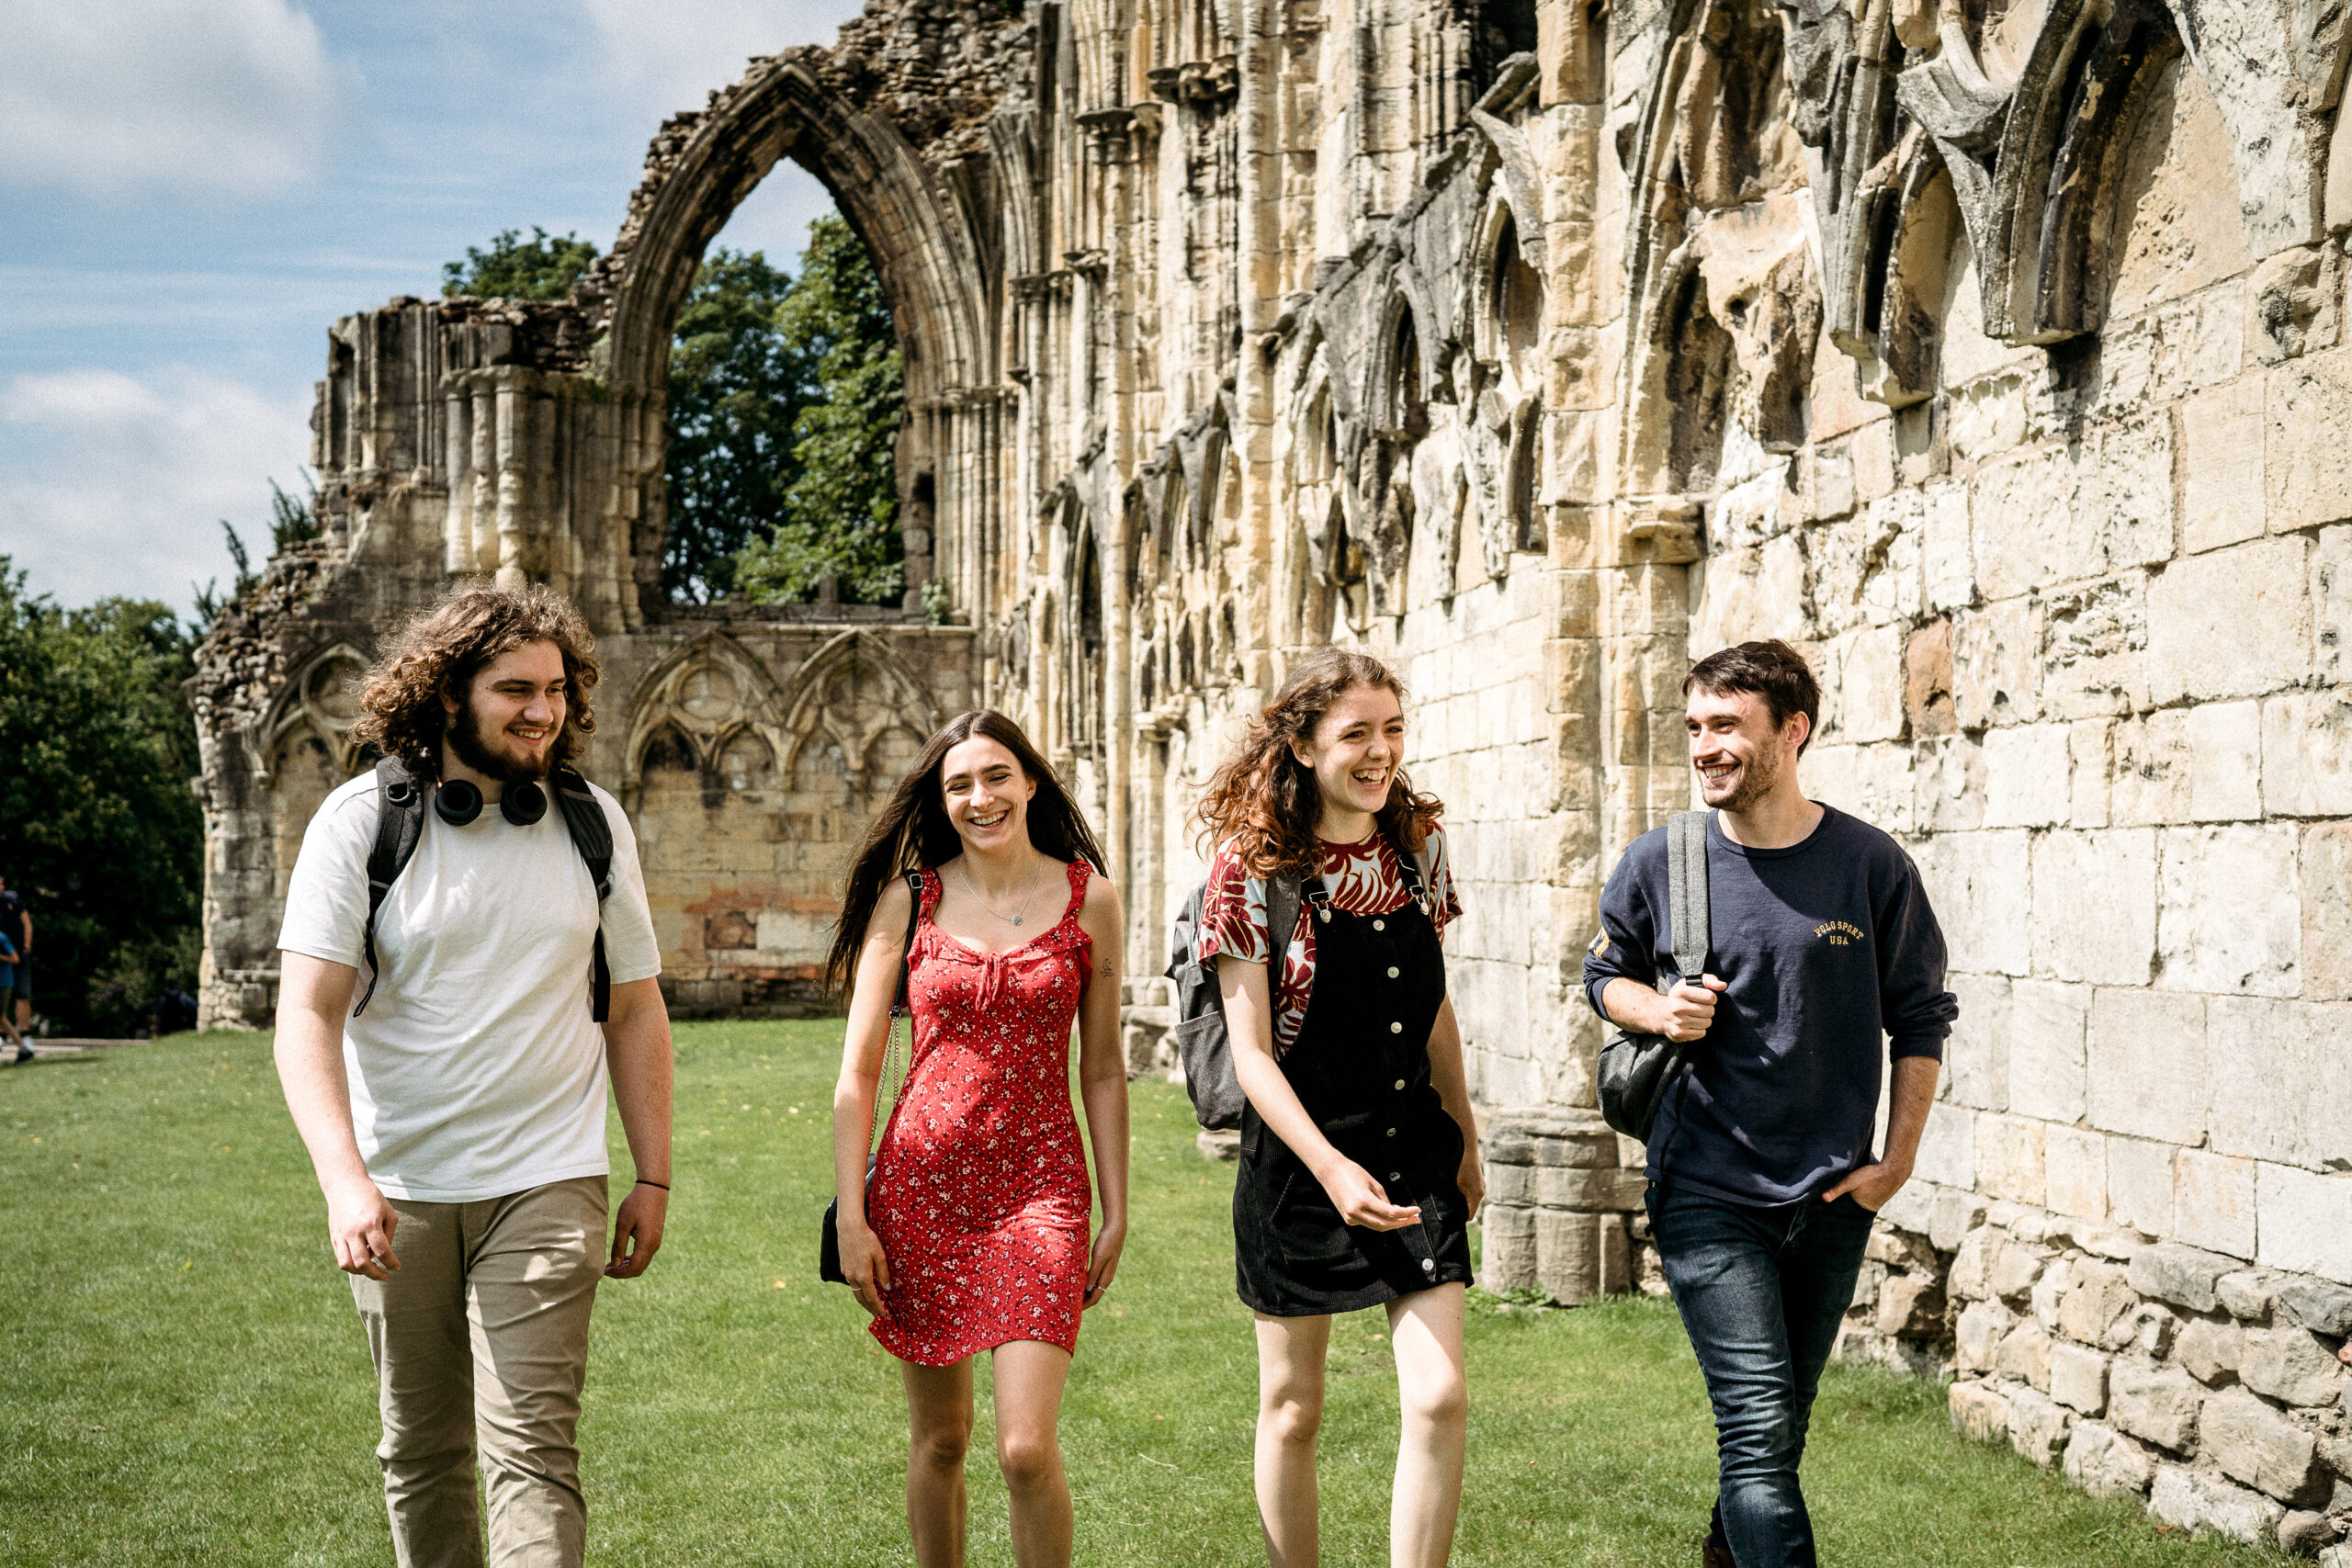 An image of four students walking in Museum Gardens in York.